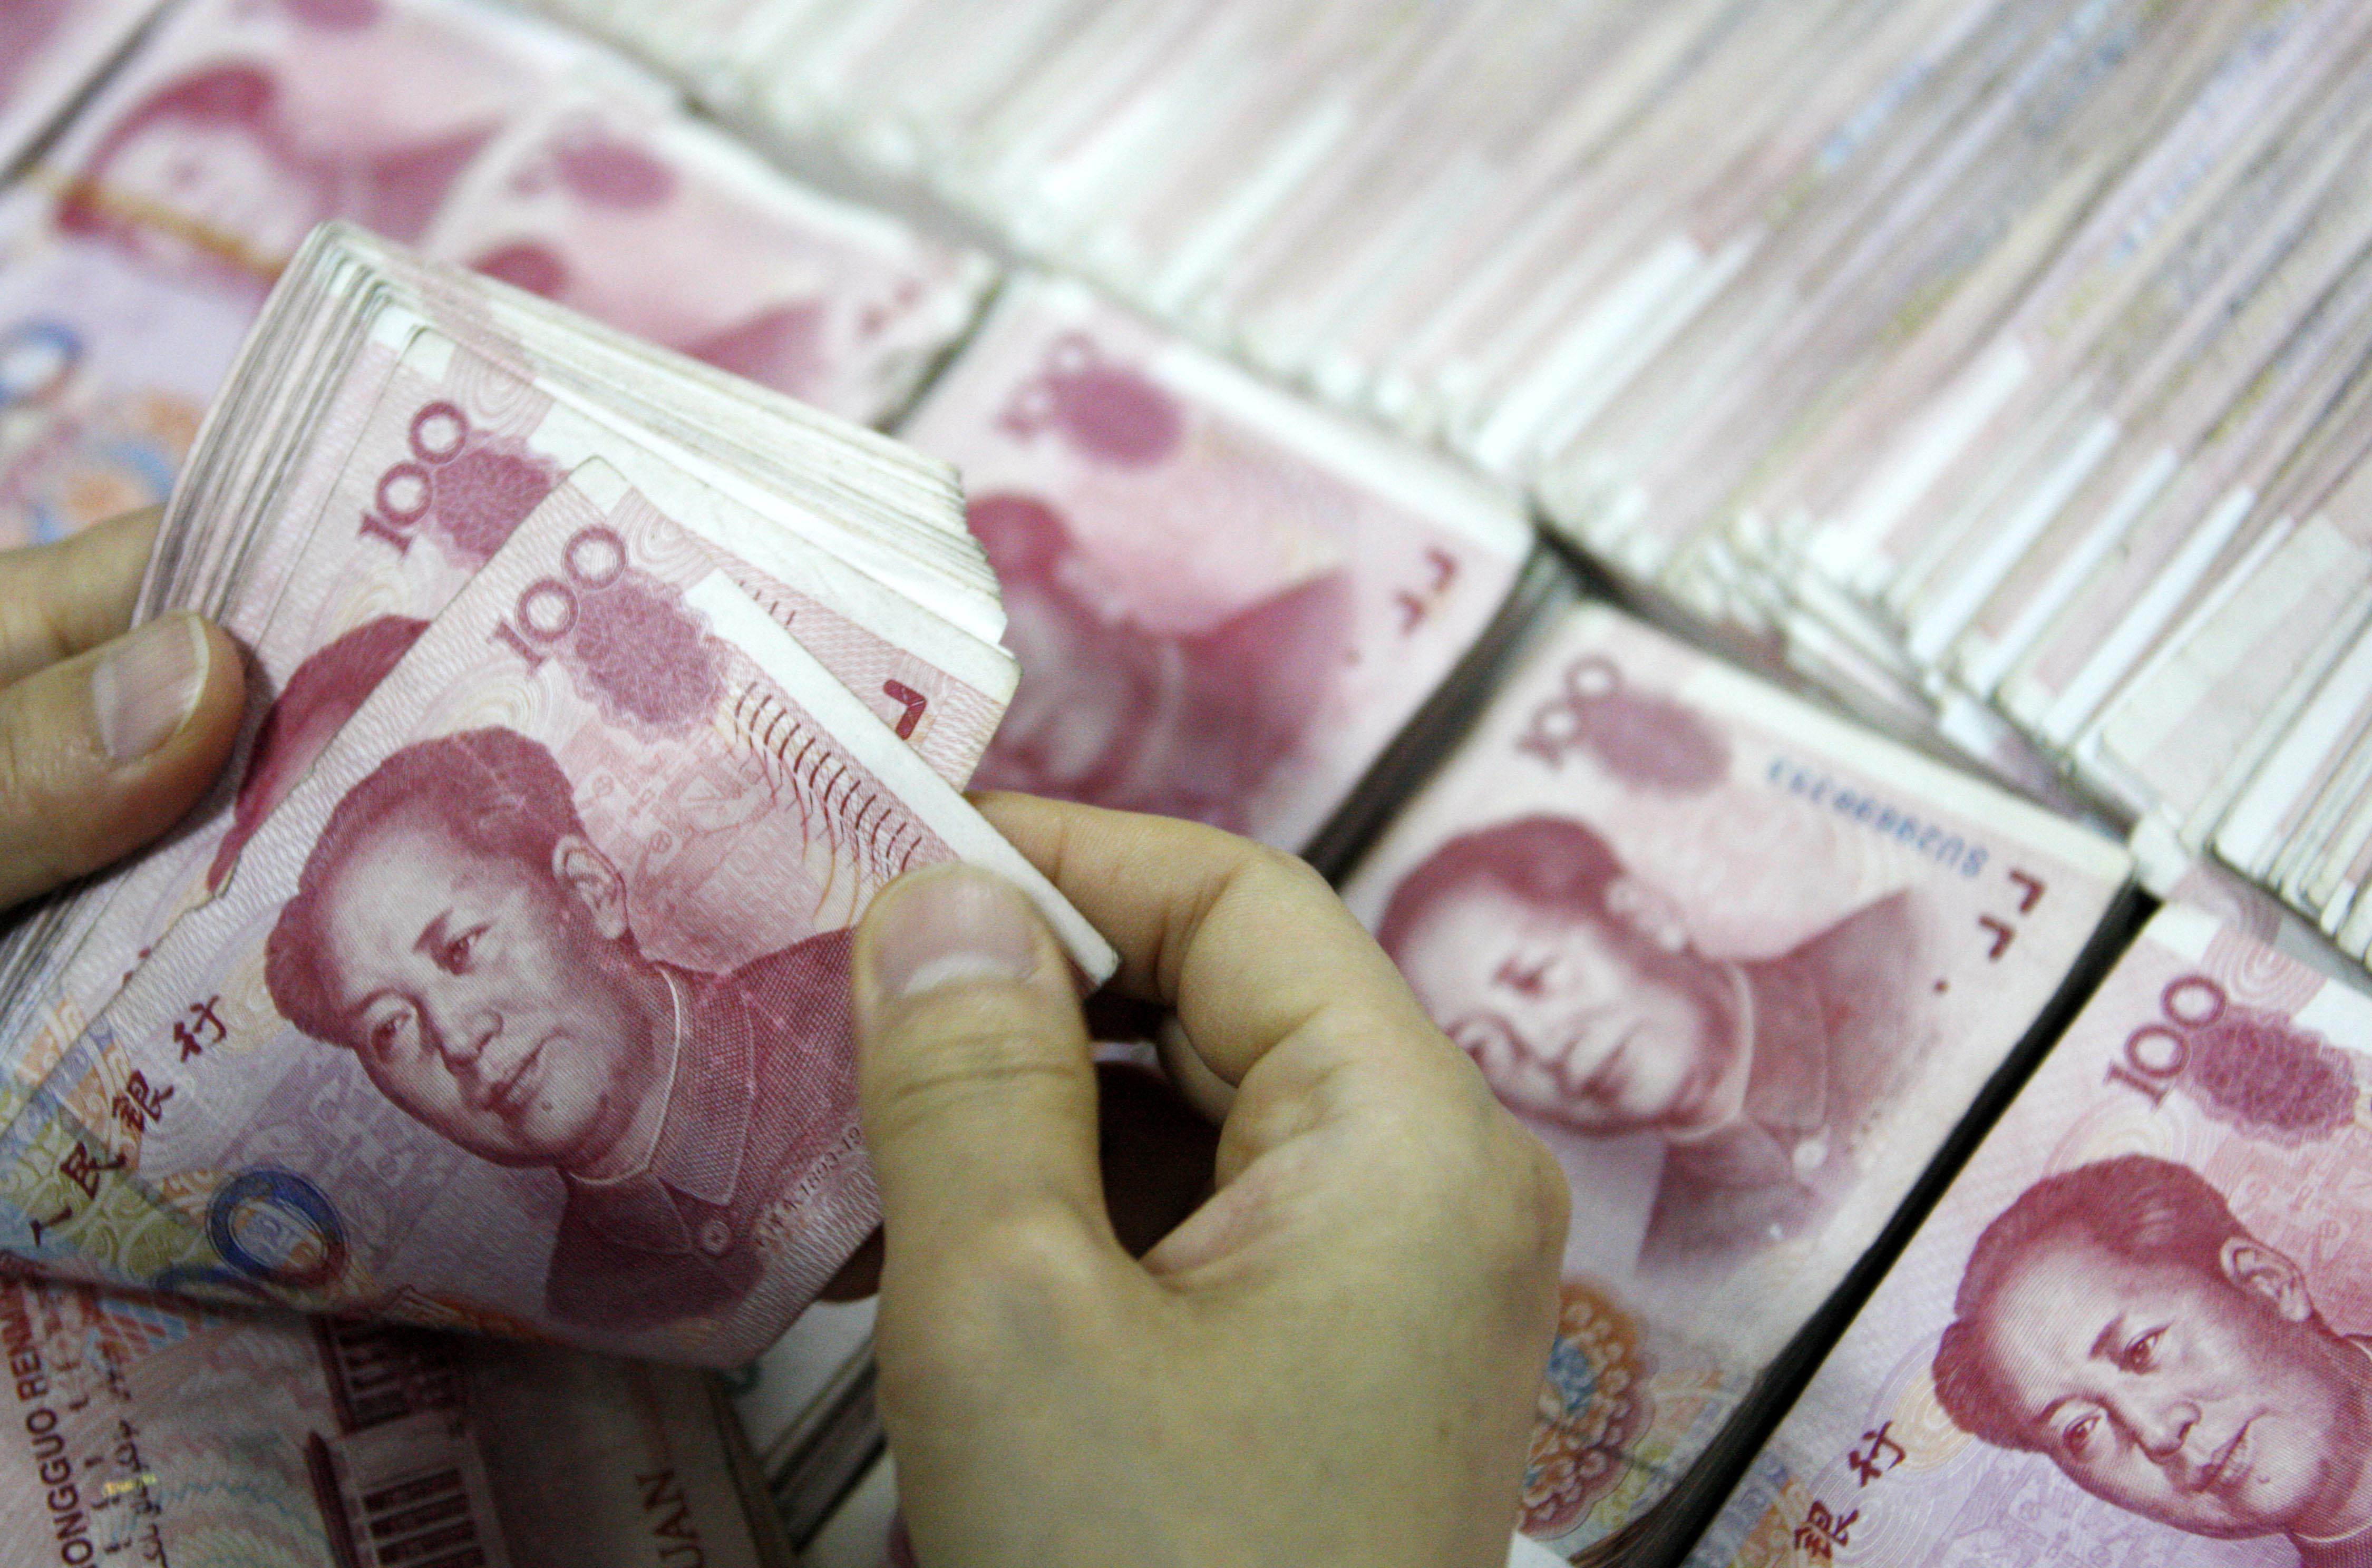 Stacks of yuan are counted at a bank in China as the currency has apparently stabilized after falling the past three days following a surprise devaluation earlier in the week. Photo: AFP